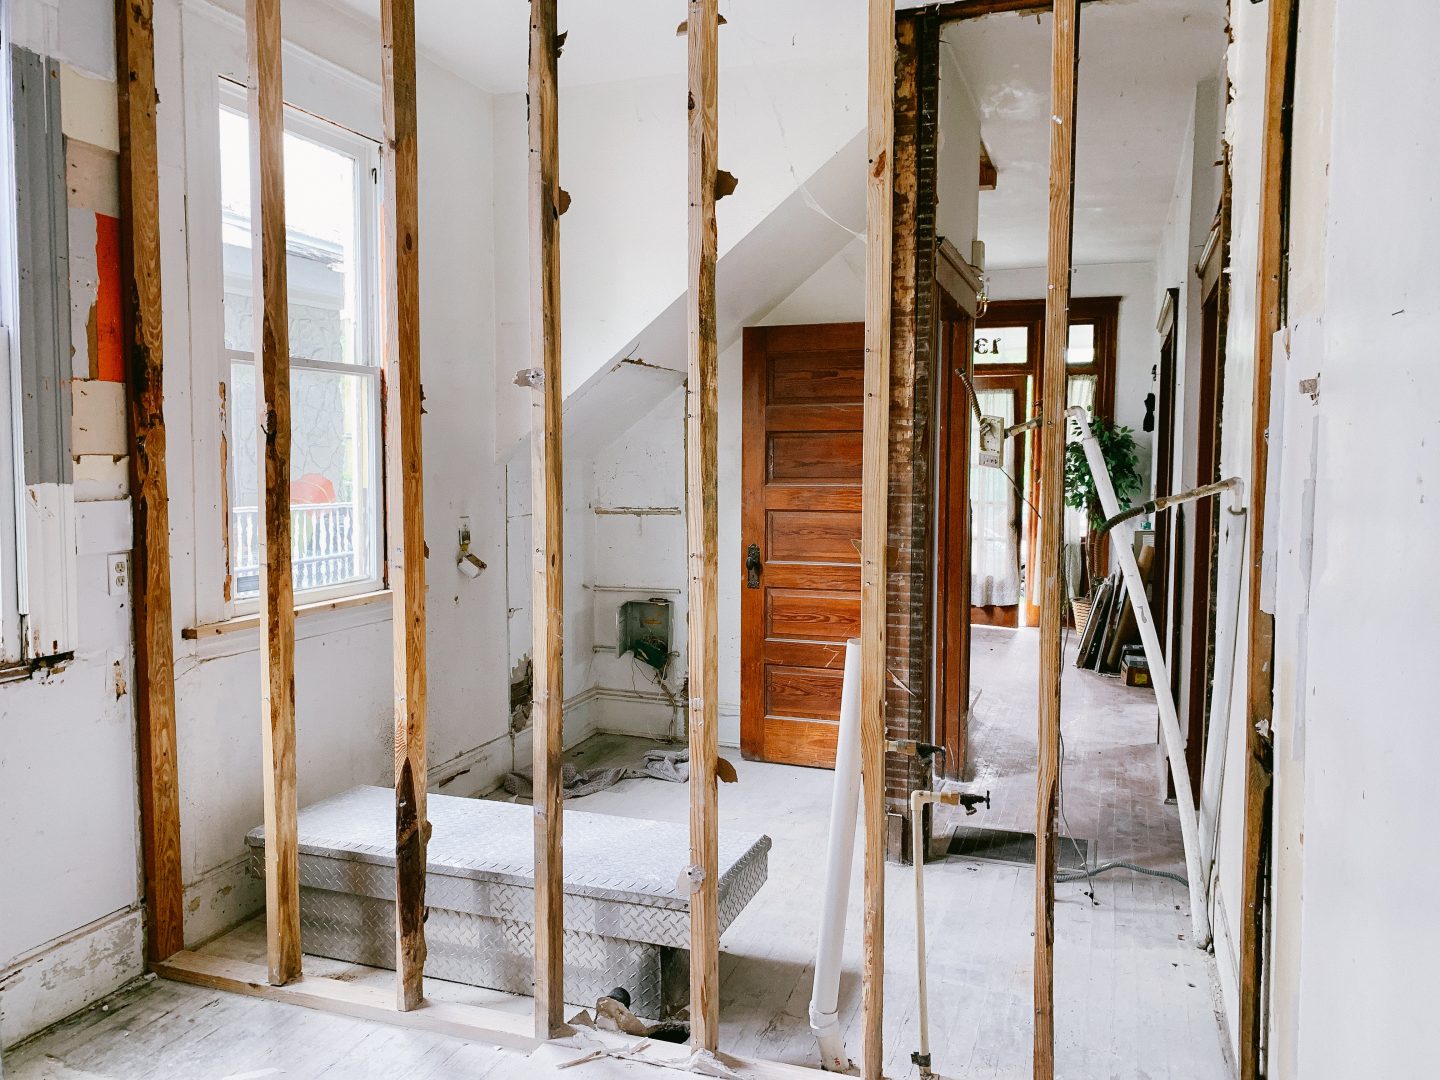 How to Get the Most From Your Home Renovation